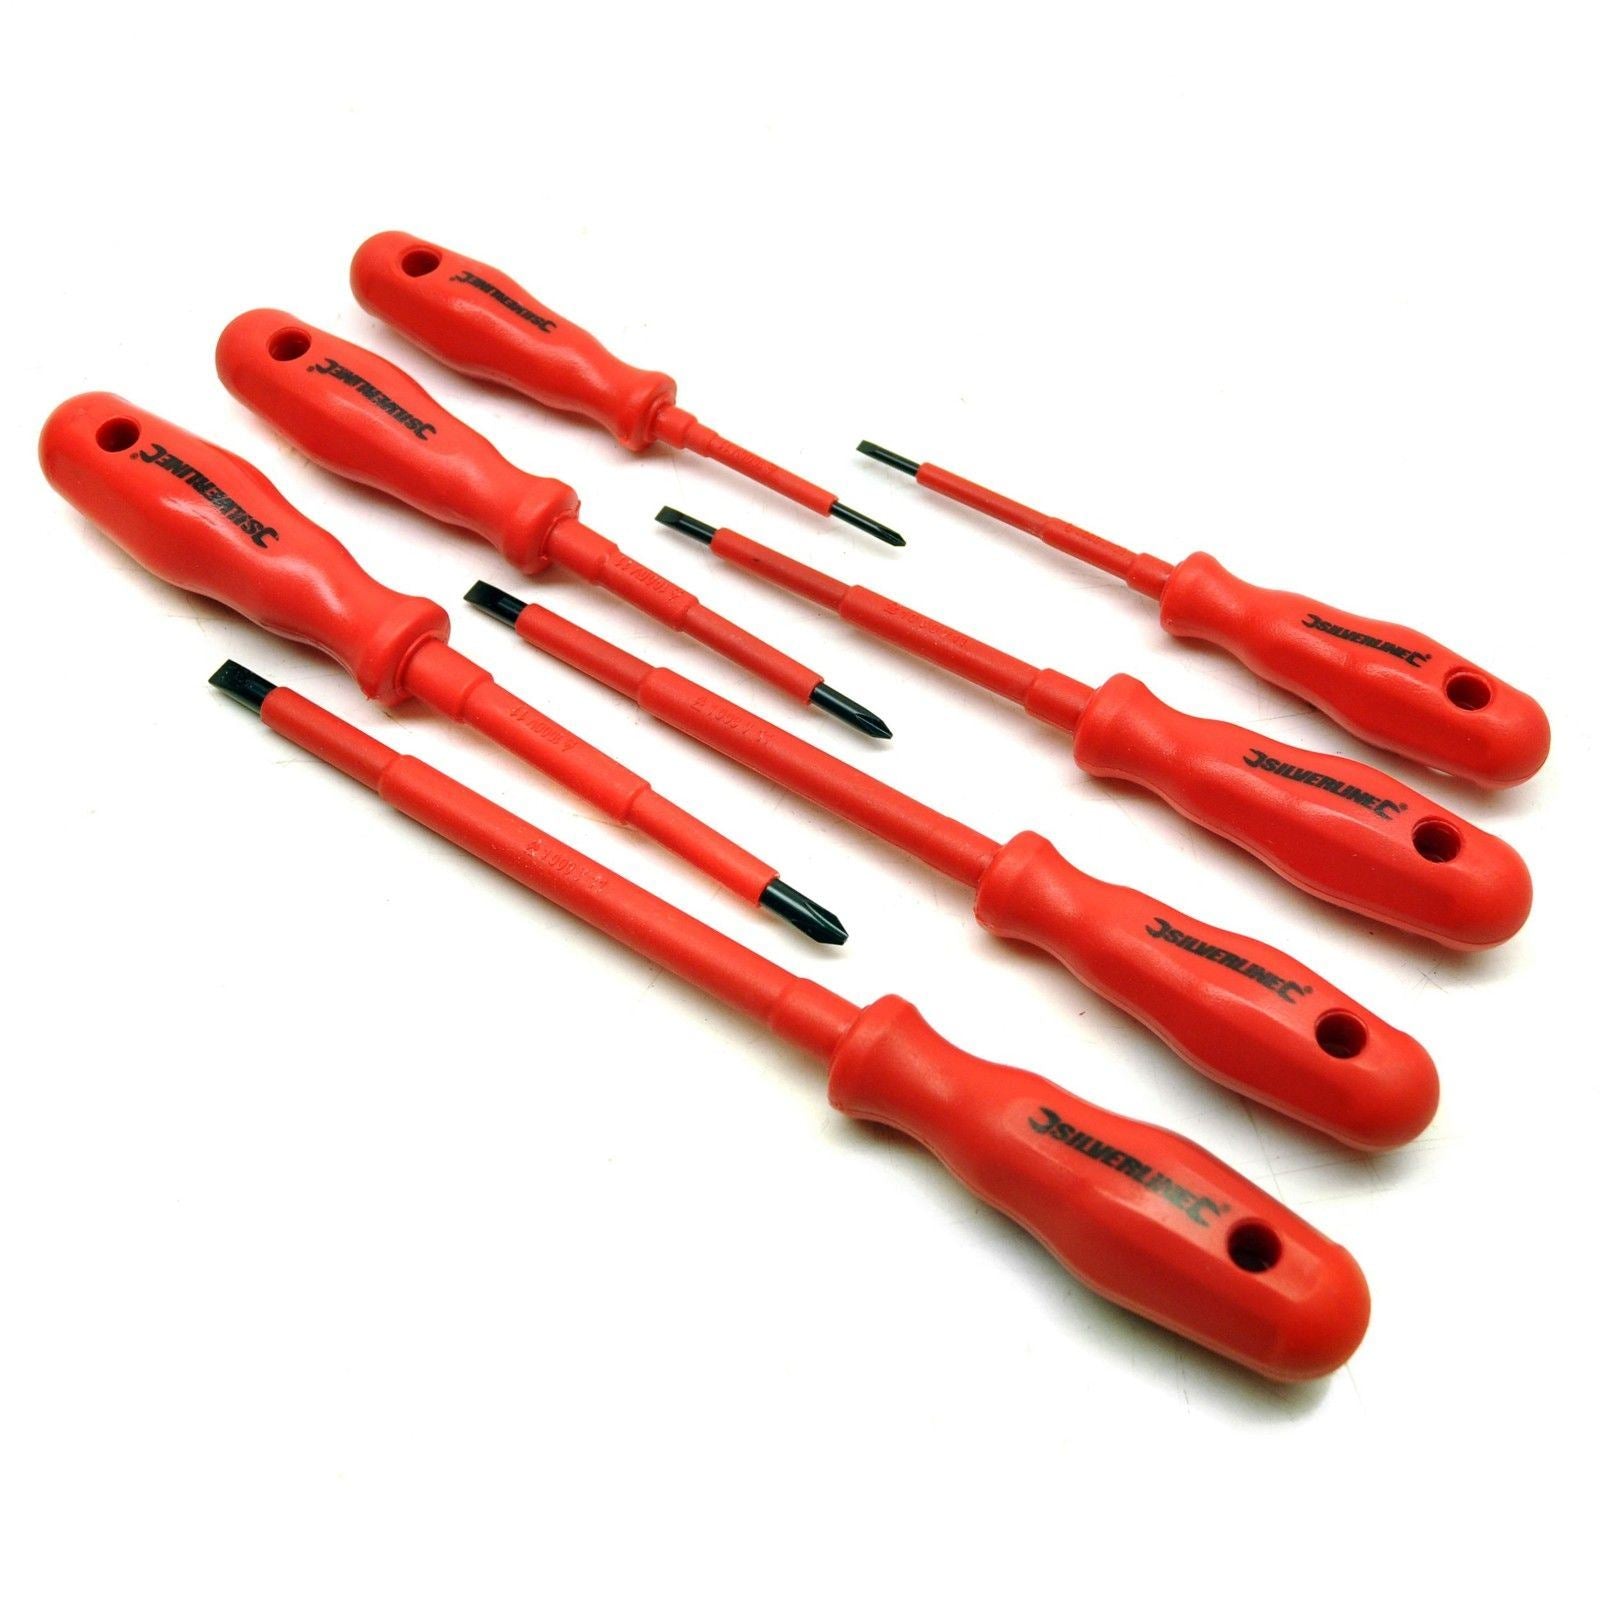 Electrical Electricians Insulated Grip Screwdriver Set Expert VDE 7pc SIL02